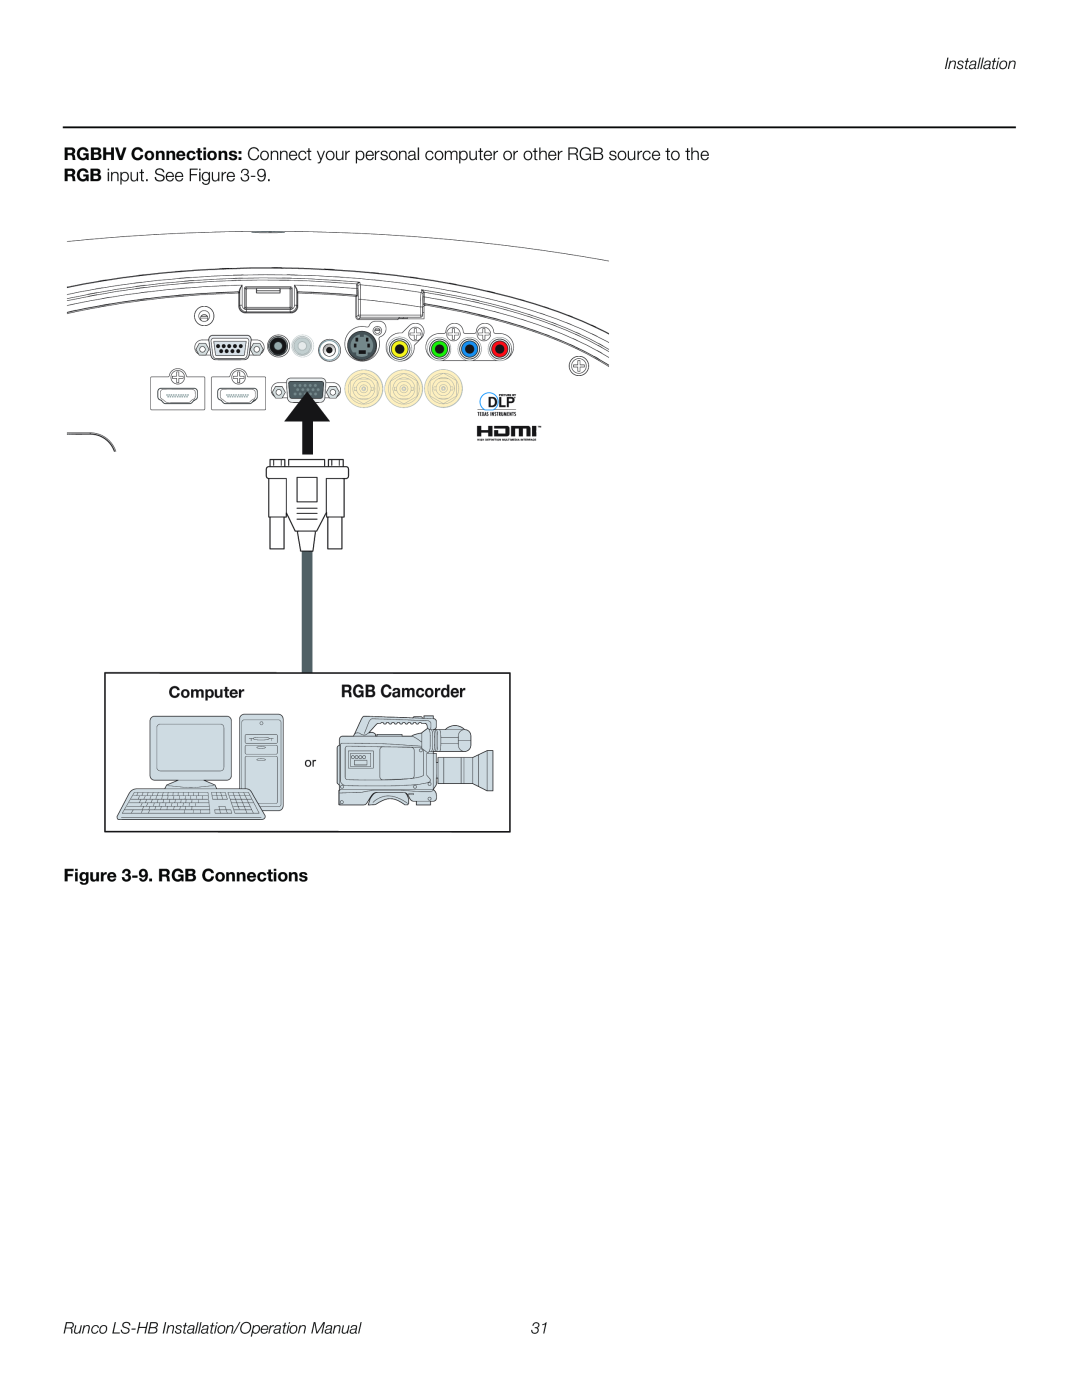 Runco LS-HB operation manual 9. RGB Connections, RGB input. See Figure, Installation 